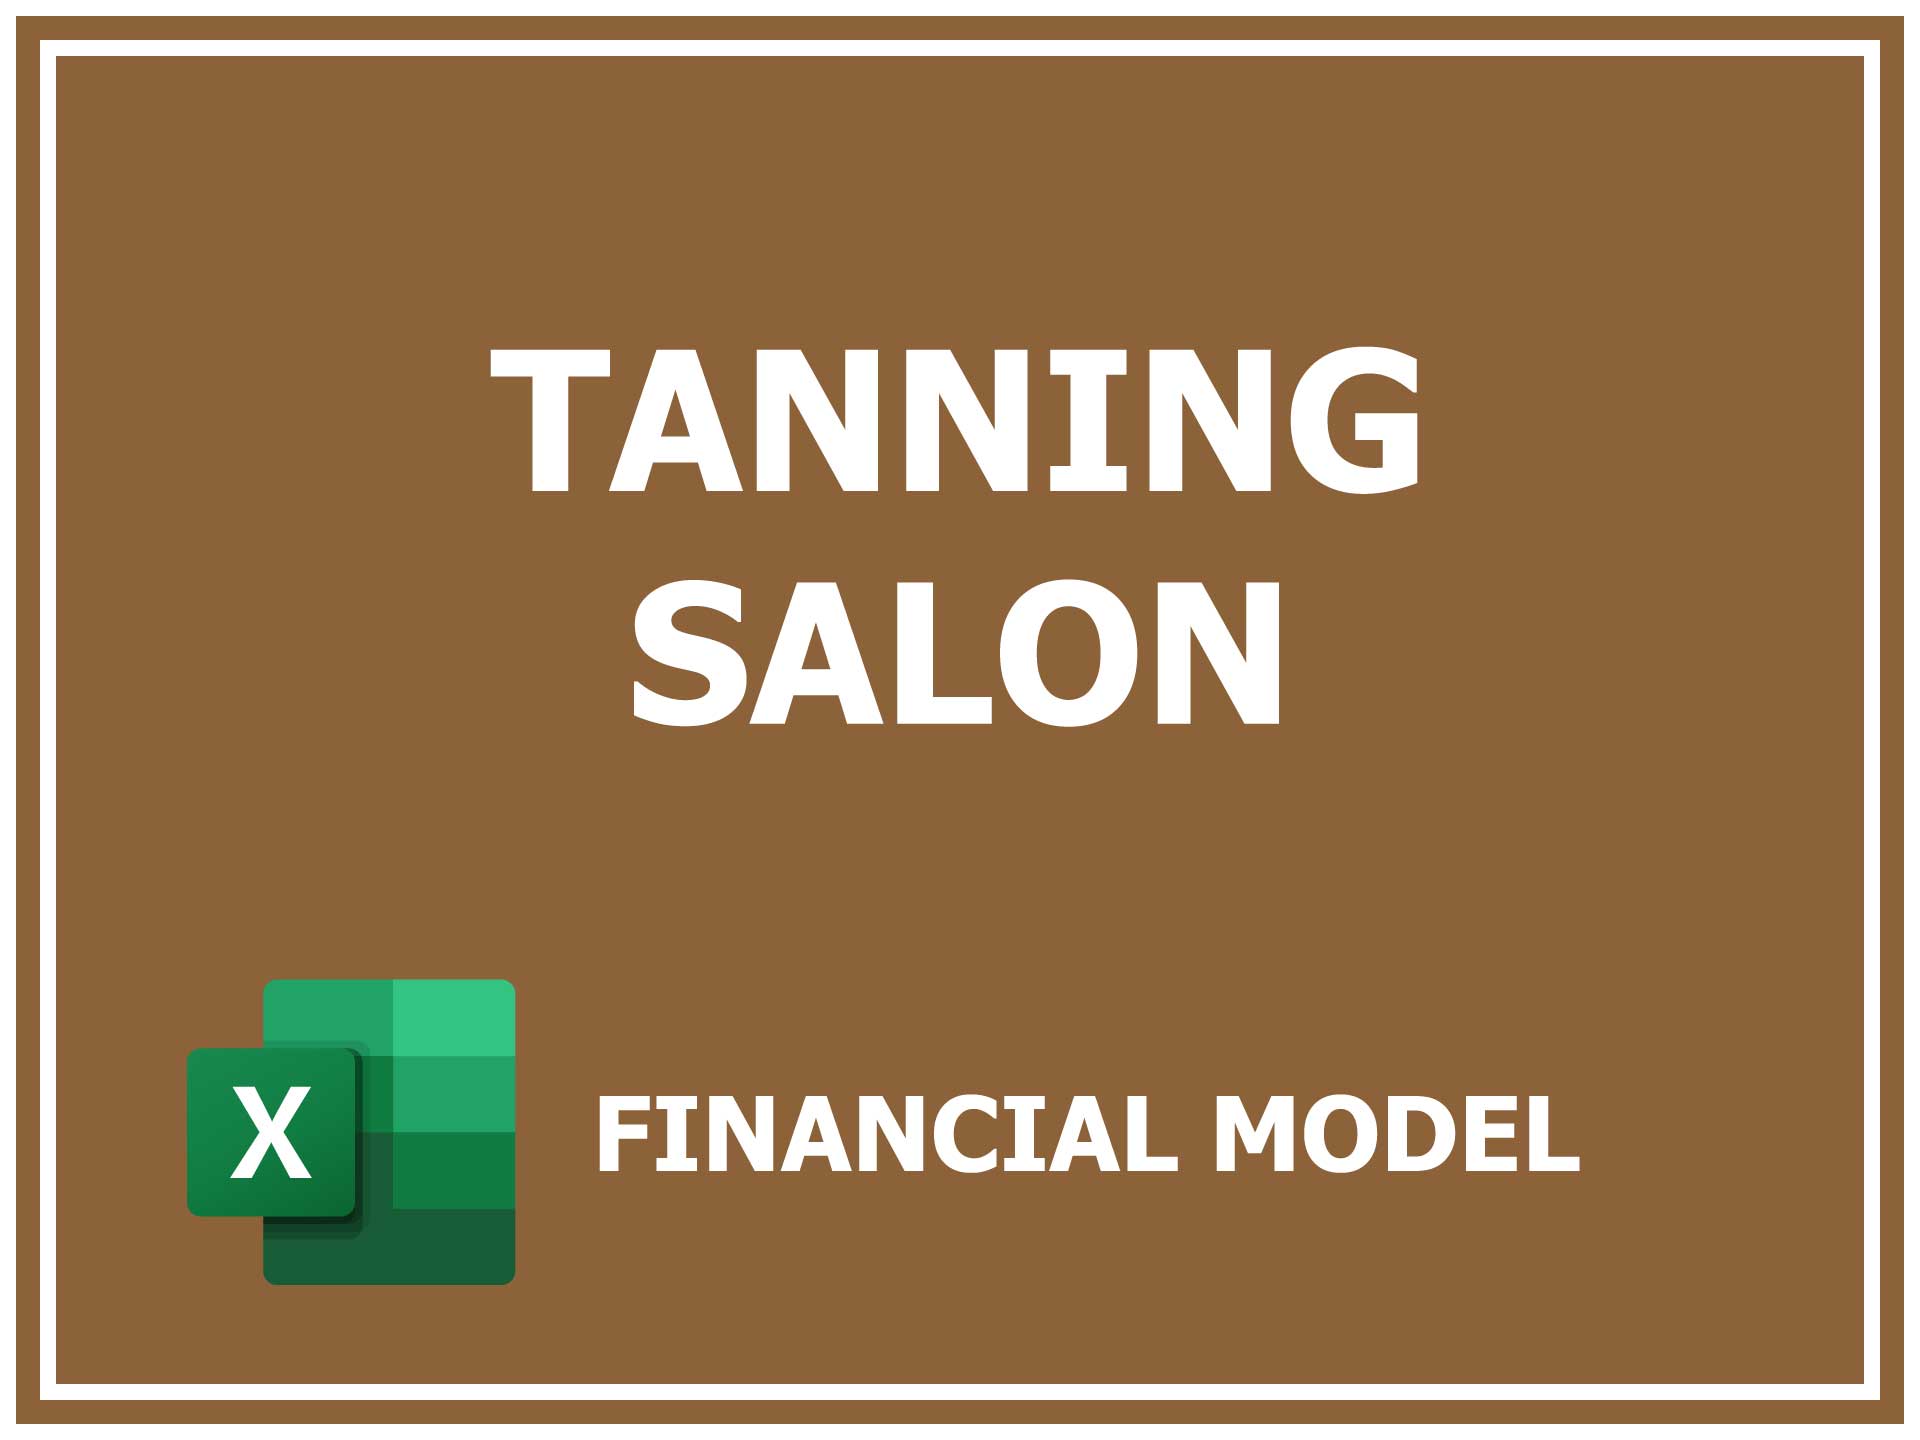 business plan for tanning salon